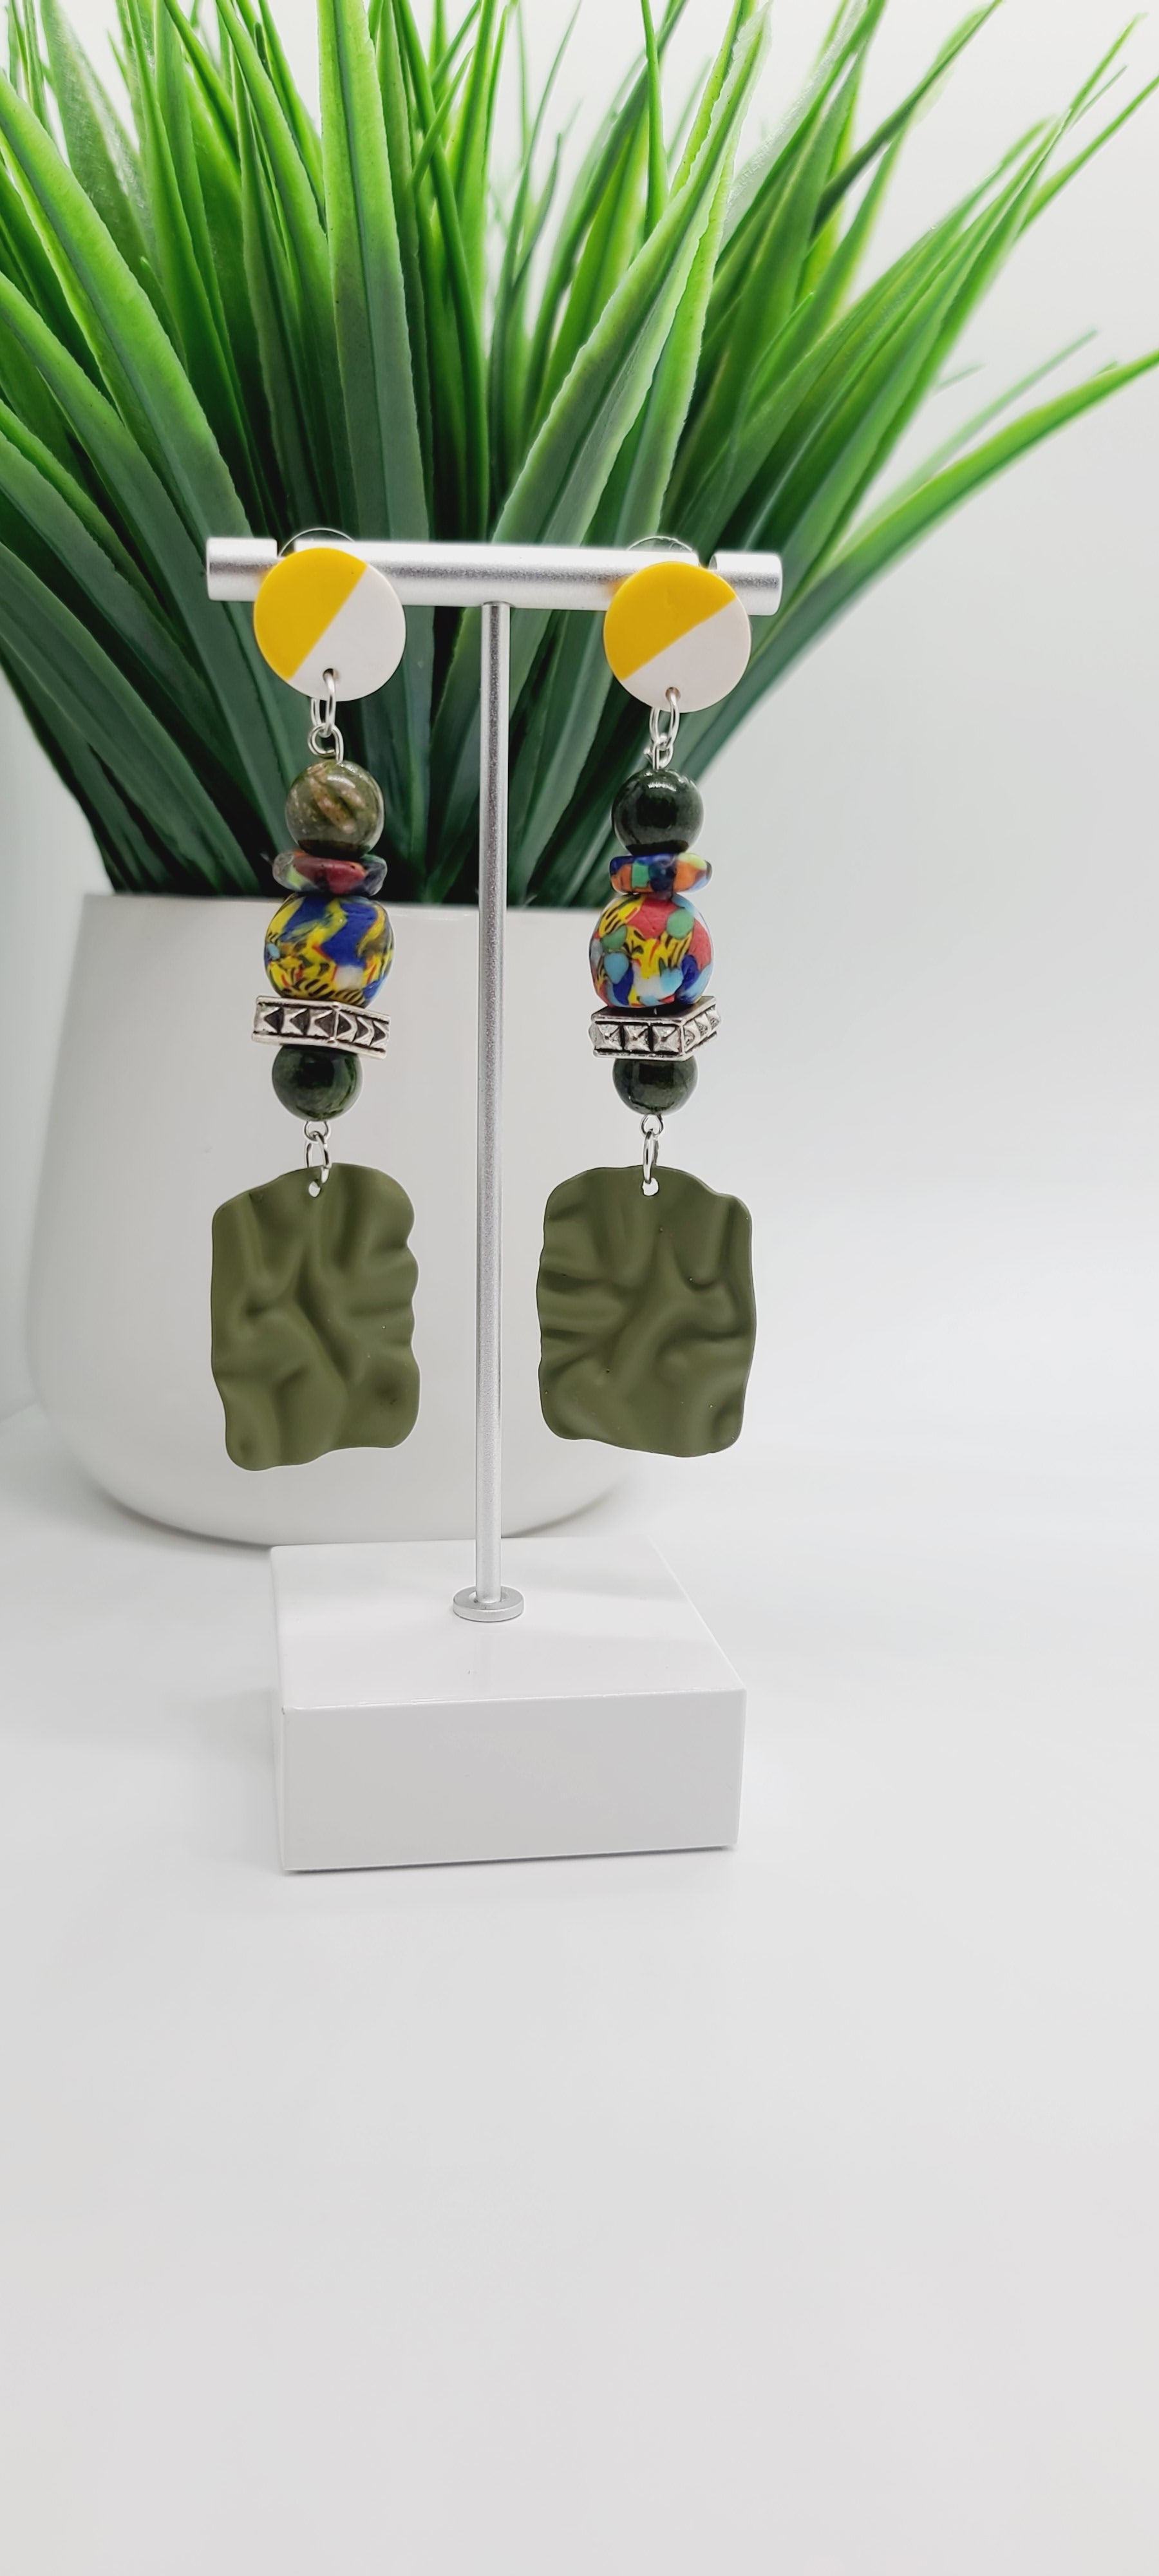 Length: 3.5 inches | Weight: 1.1 ounces  Distinctly You! These yellow and white ceramic post earrings are made with olive green rubbered metal charms, 10mm olive green Agate atones, 14mm house medley Ghana glass beads and rondelles, and silver squared rondelles.